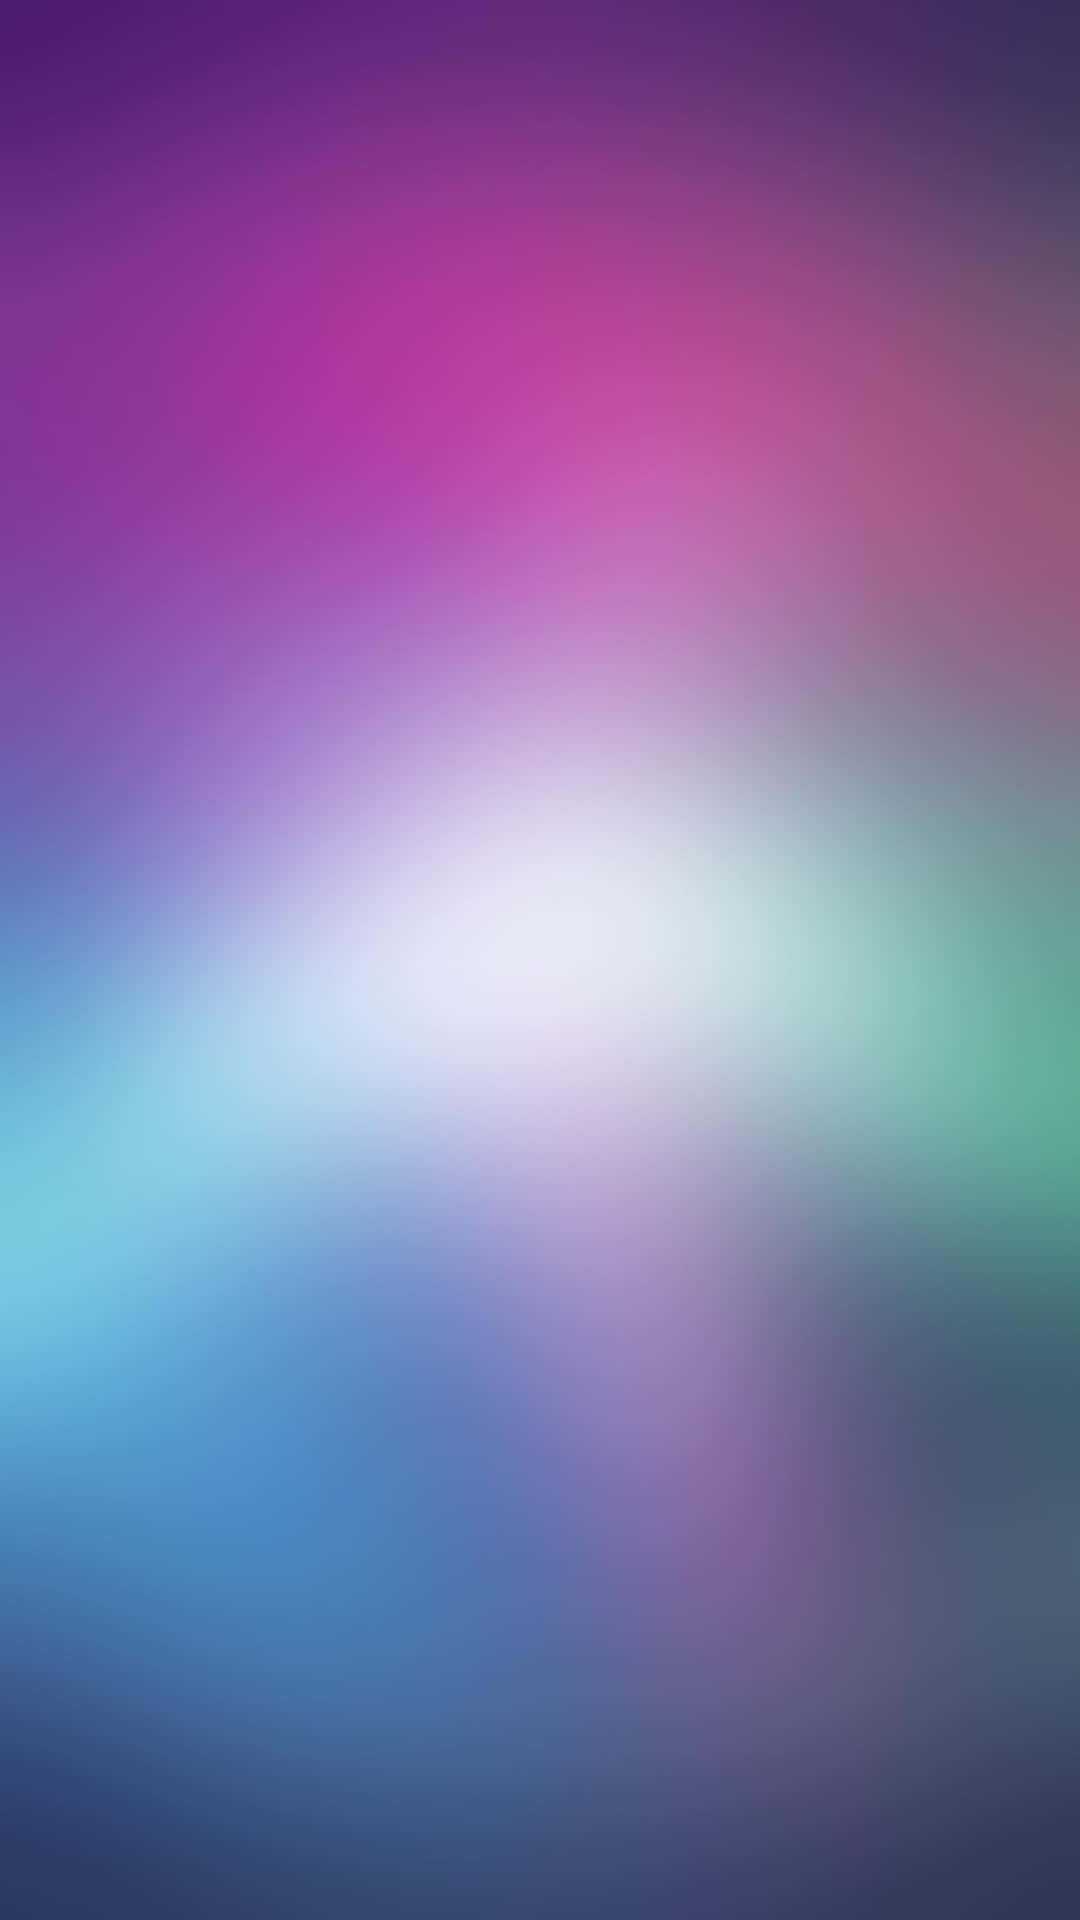 A Blurred Background With A Colorful Light Wallpaper